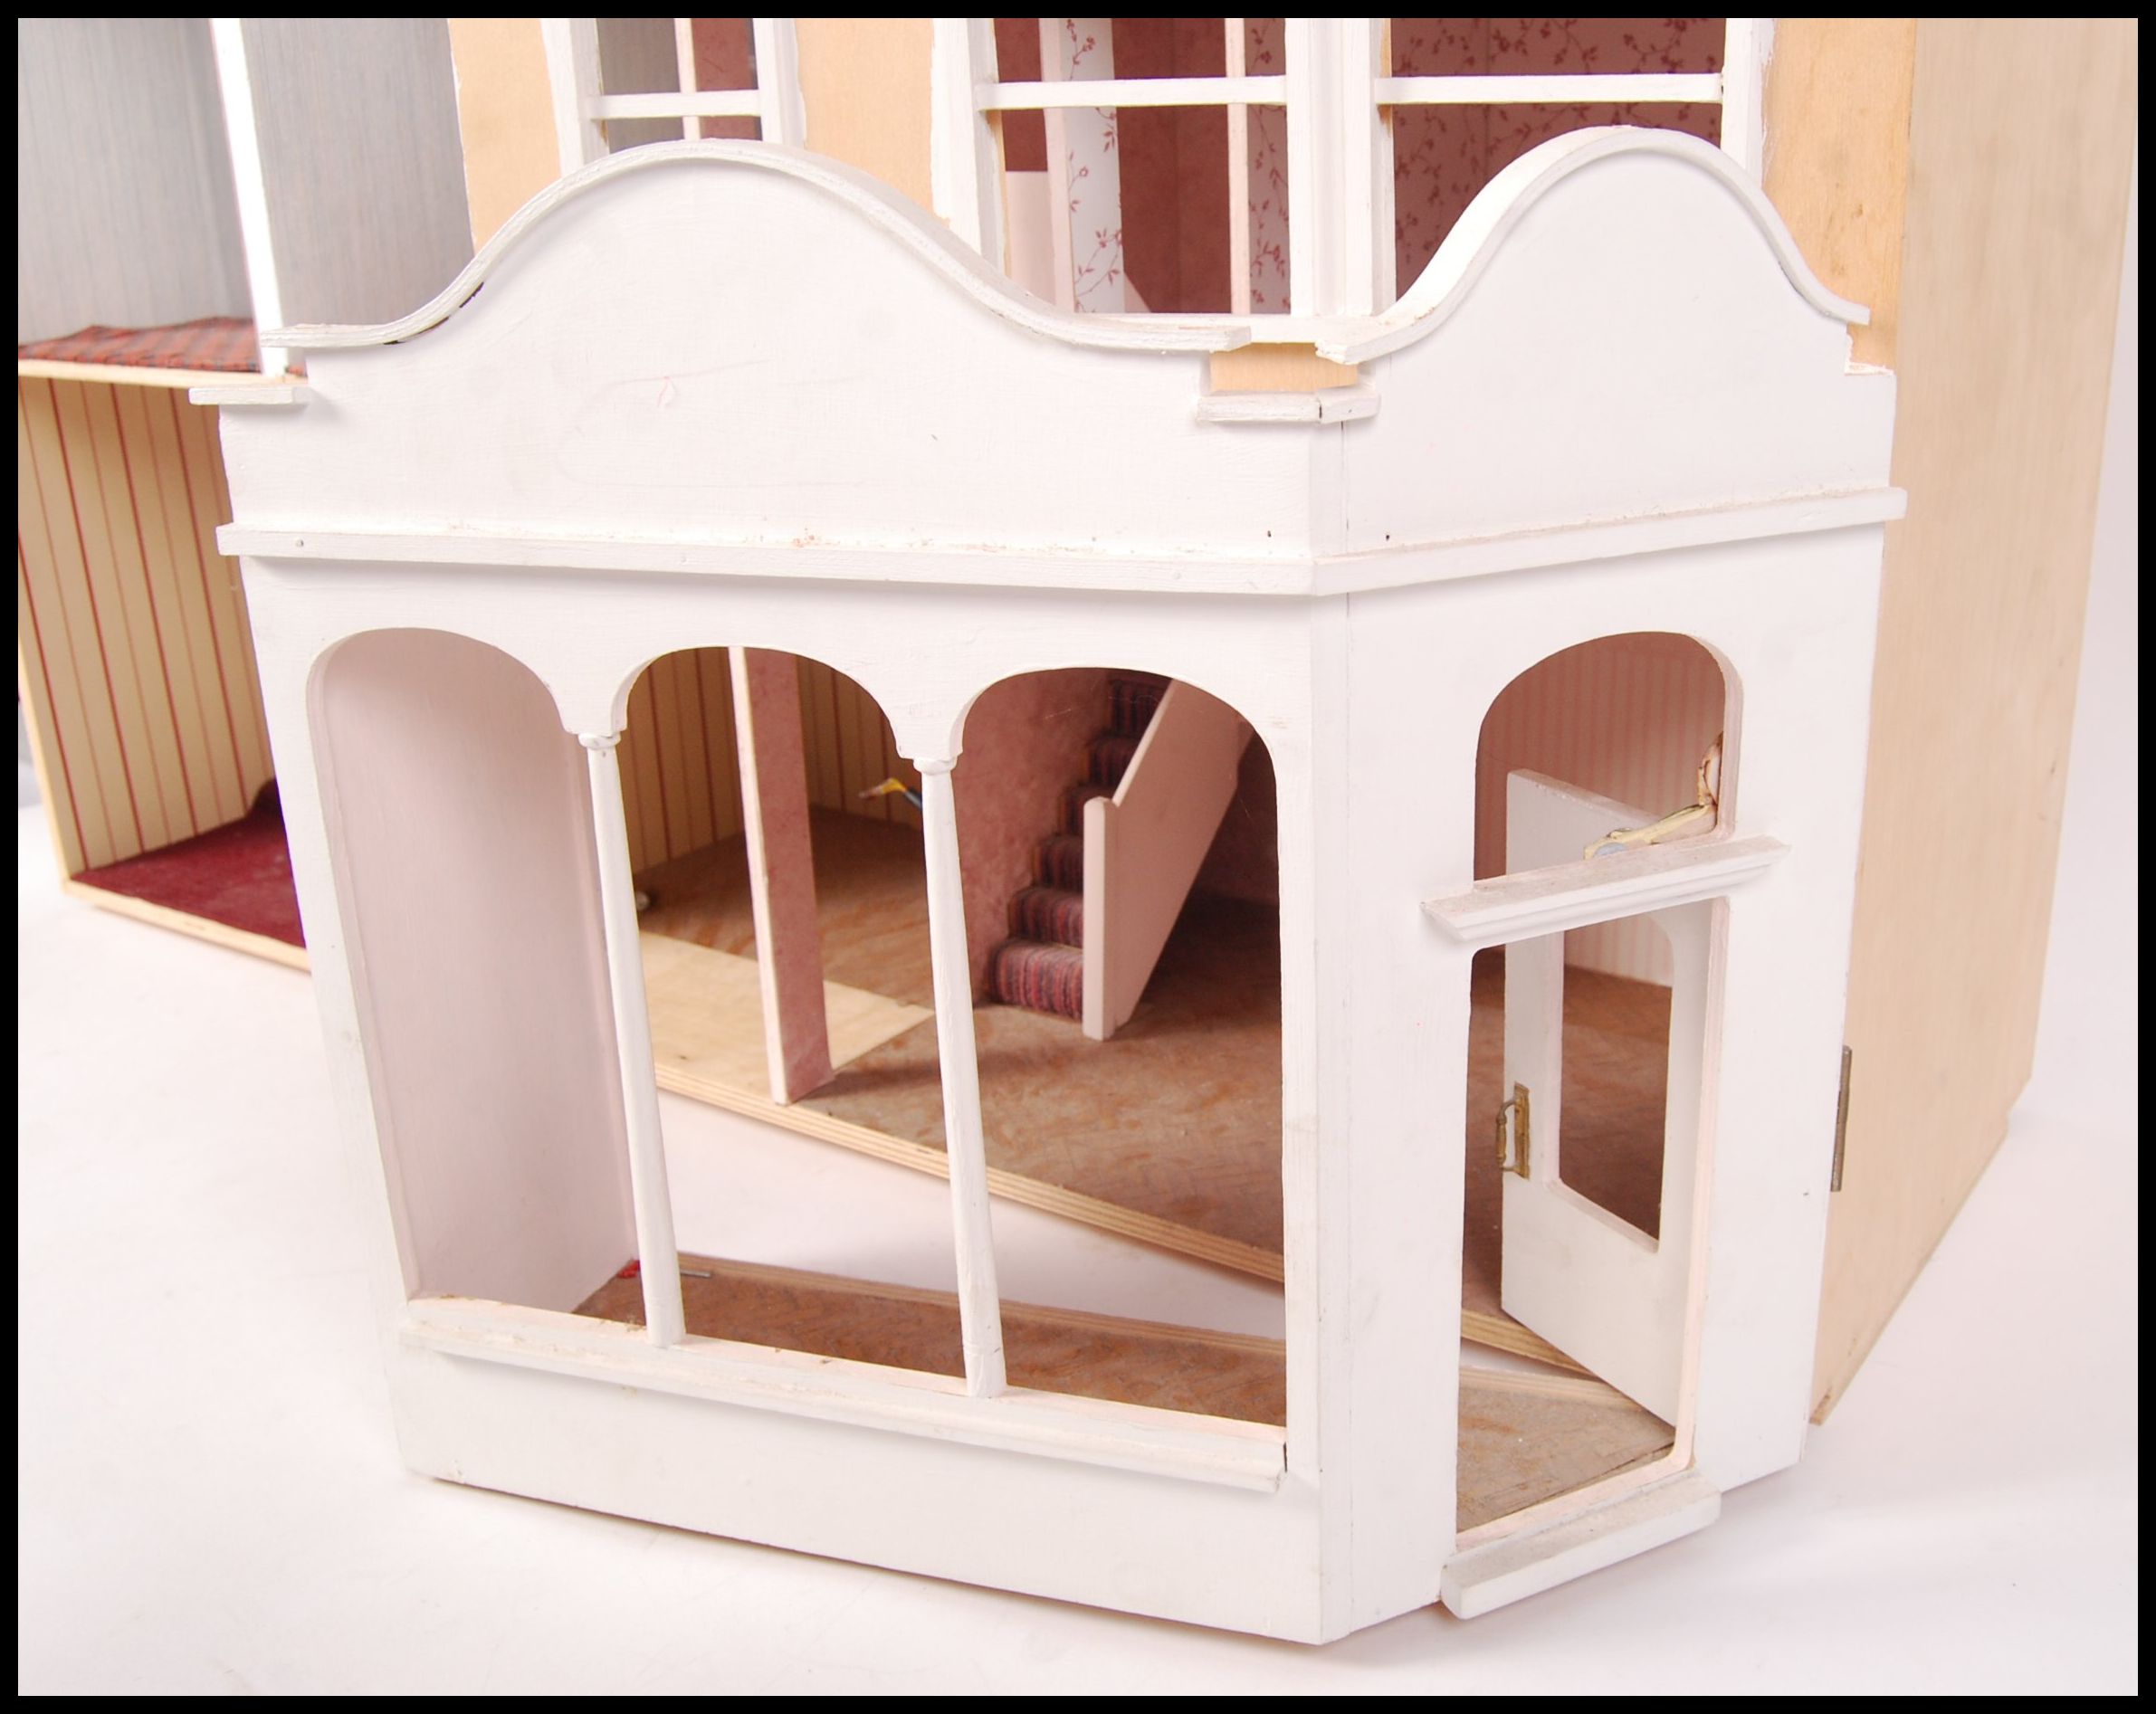 CONTEMPORARY PART FINISHED DOLLS HOUSE WITH SHOP F - Image 3 of 3